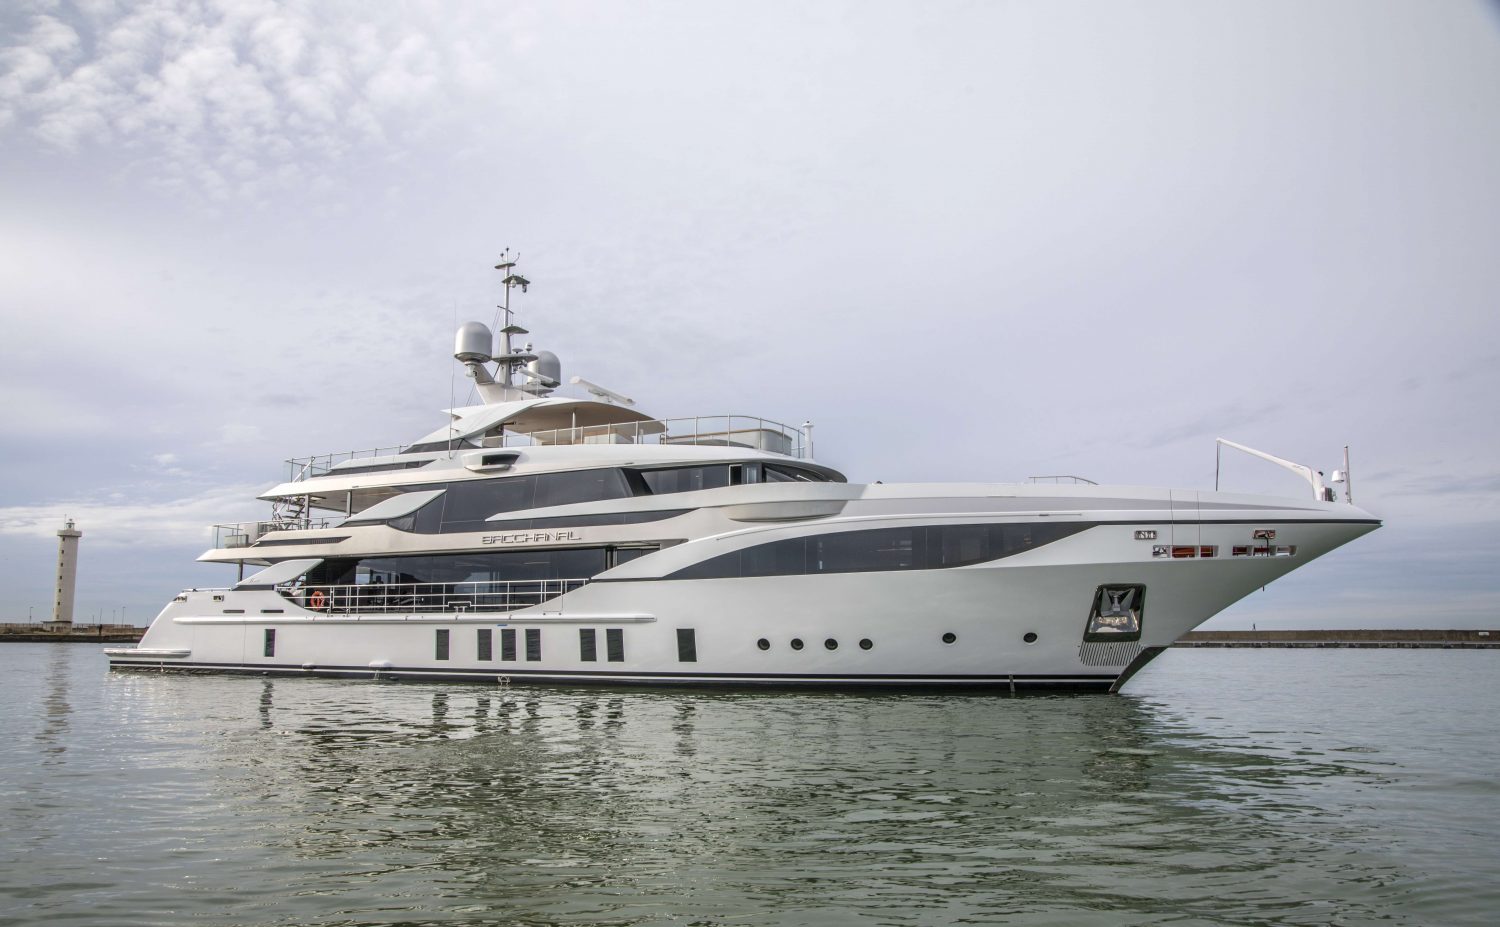 BENETTI AT THE FORT LAUDERDALE INTERNATIONAL BOAT SHOW 2021